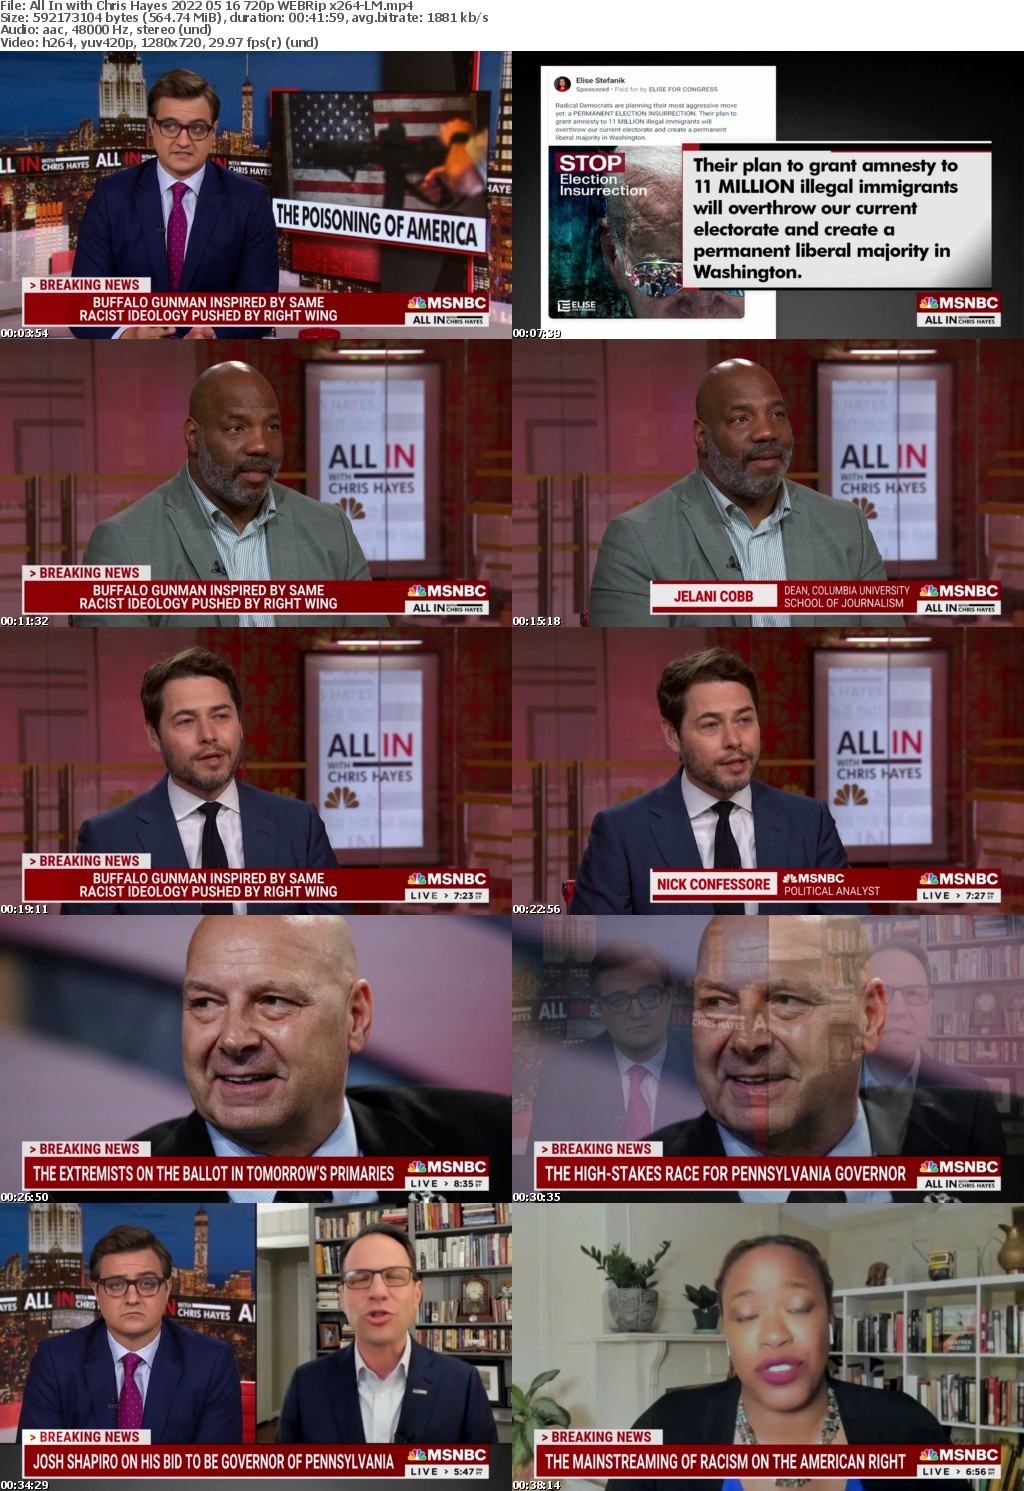 All In with Chris Hayes 2022 05 16 720p WEBRip x264-LM